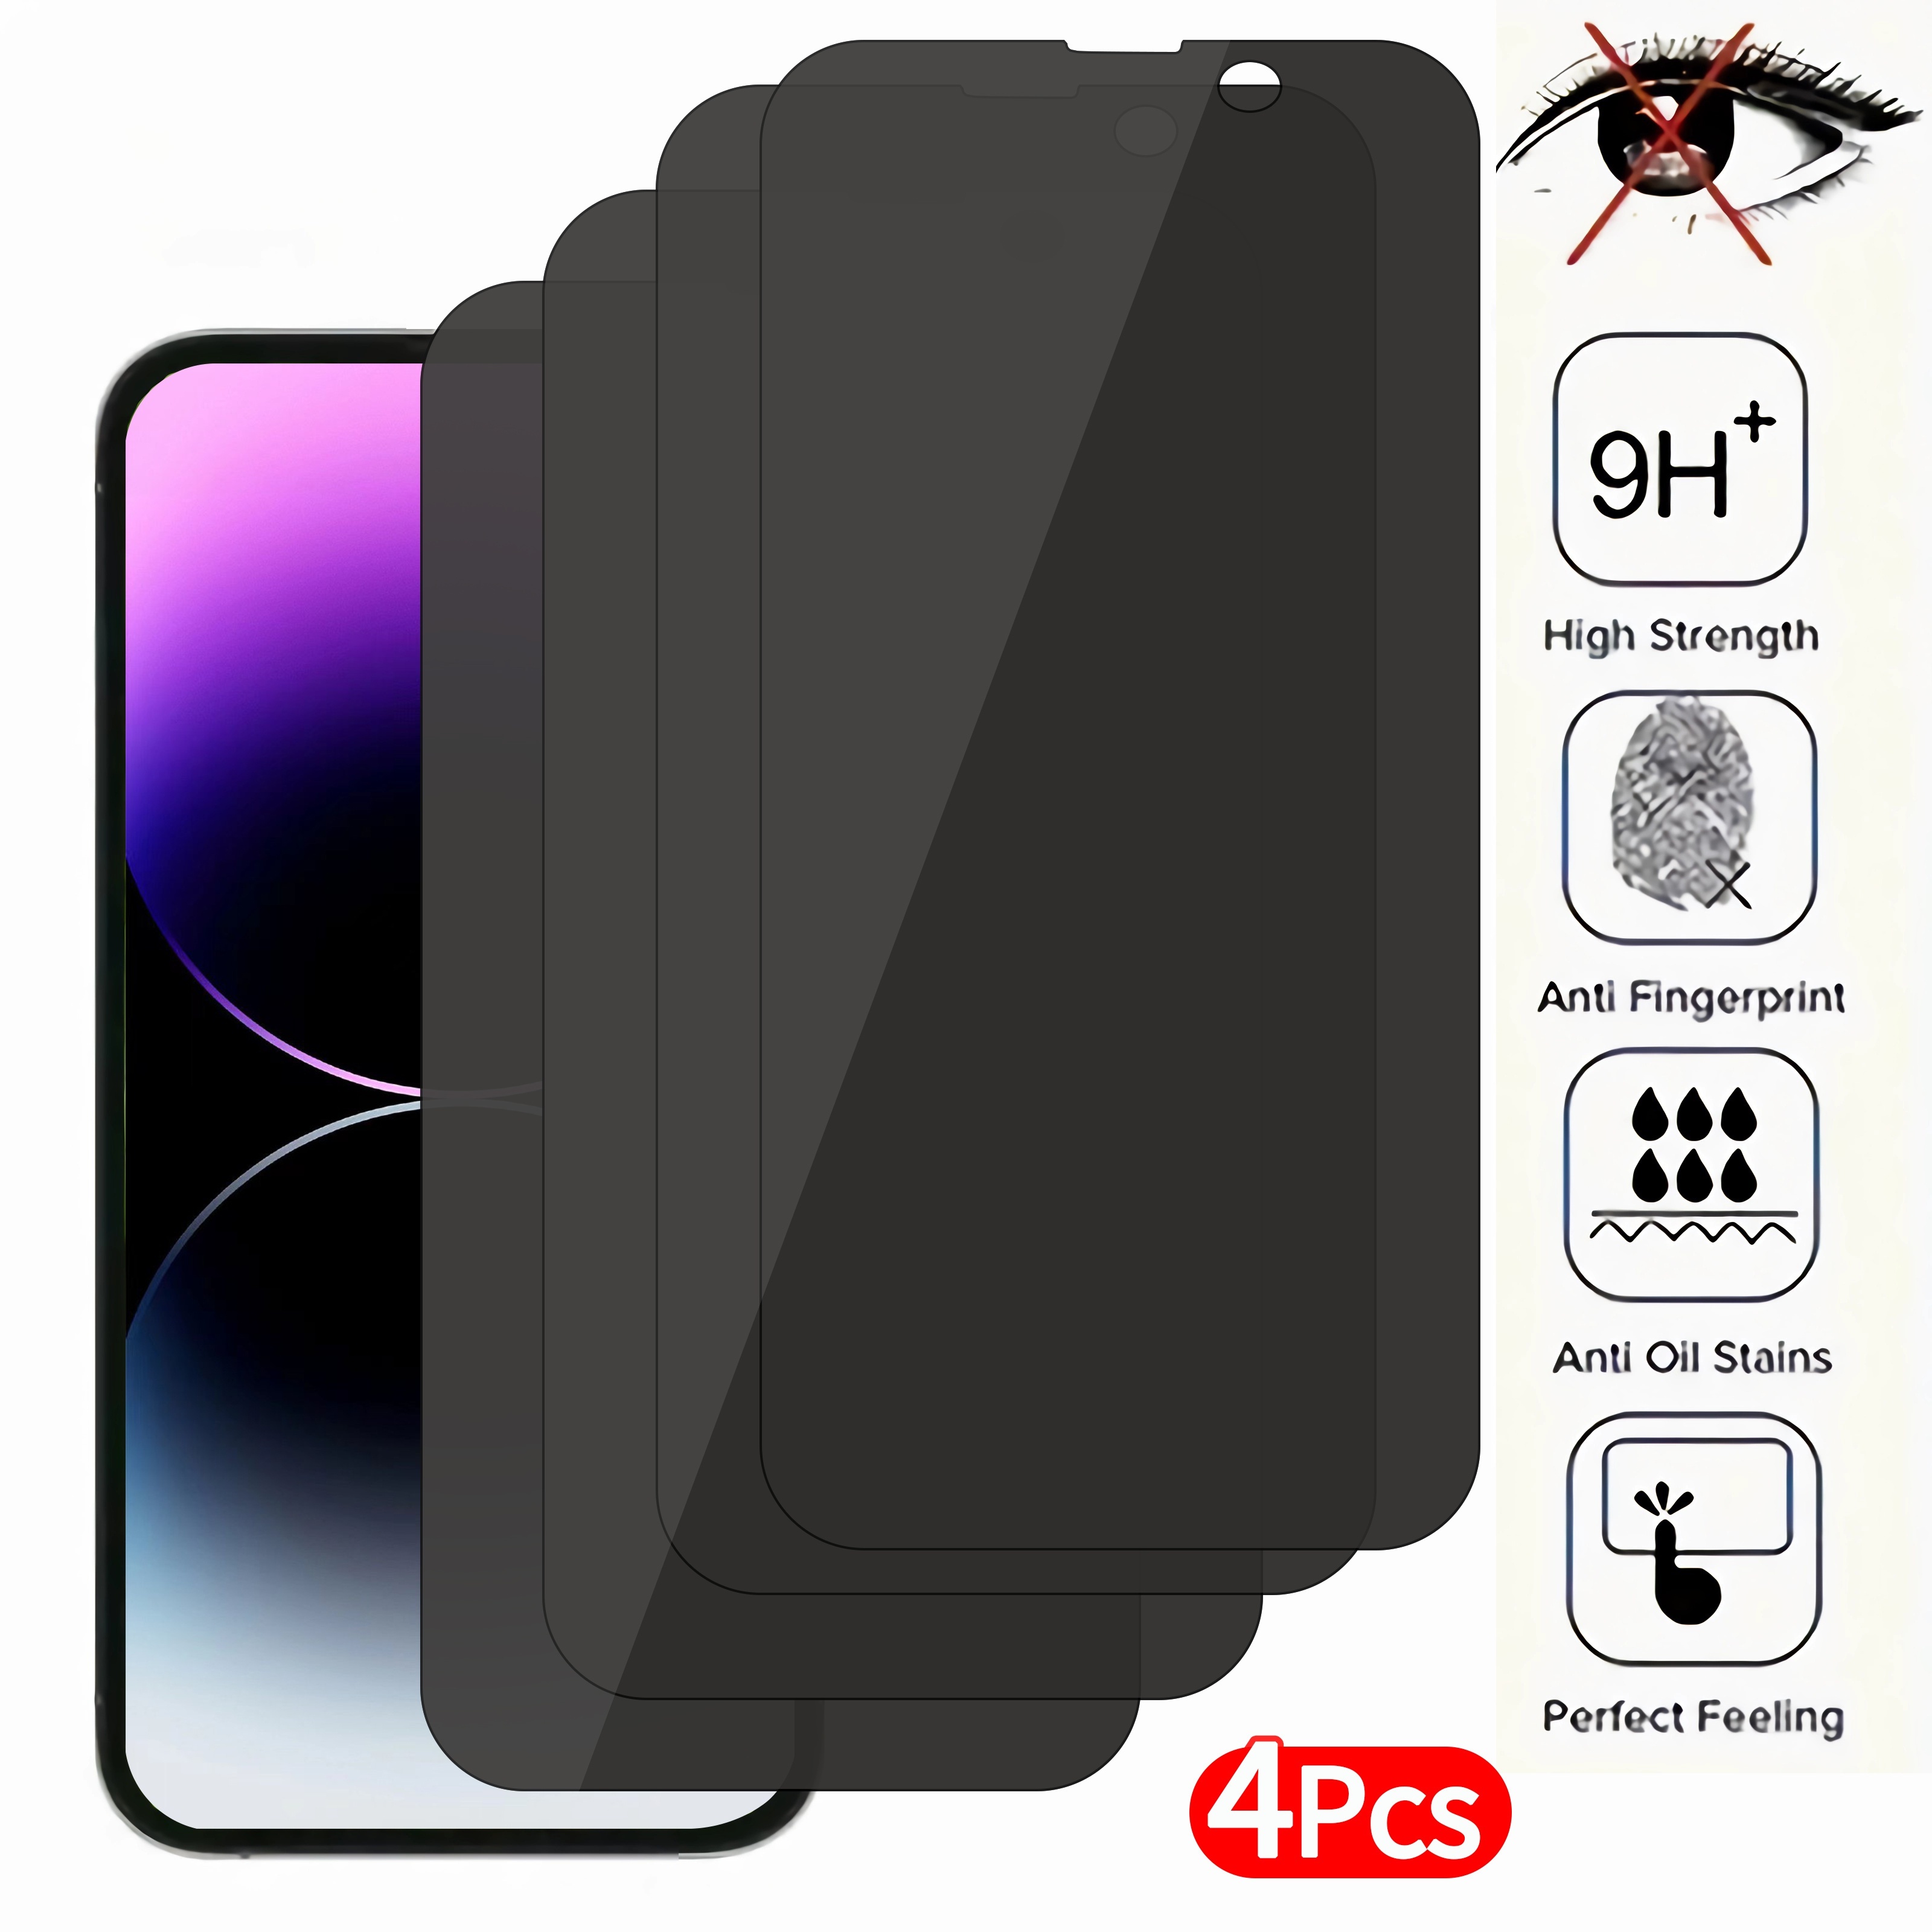 

privacyplus" 4-piece Anti-spy Tempered Glass Screen Protectors For Iphone 6/7/8/se2, X/xs/xr/xs Max, 11/pro/max, 12/mini/pro/max, 13/mini/pro/max, 14/plus/pro/max - Full Coverage Privacy Film By Rkry